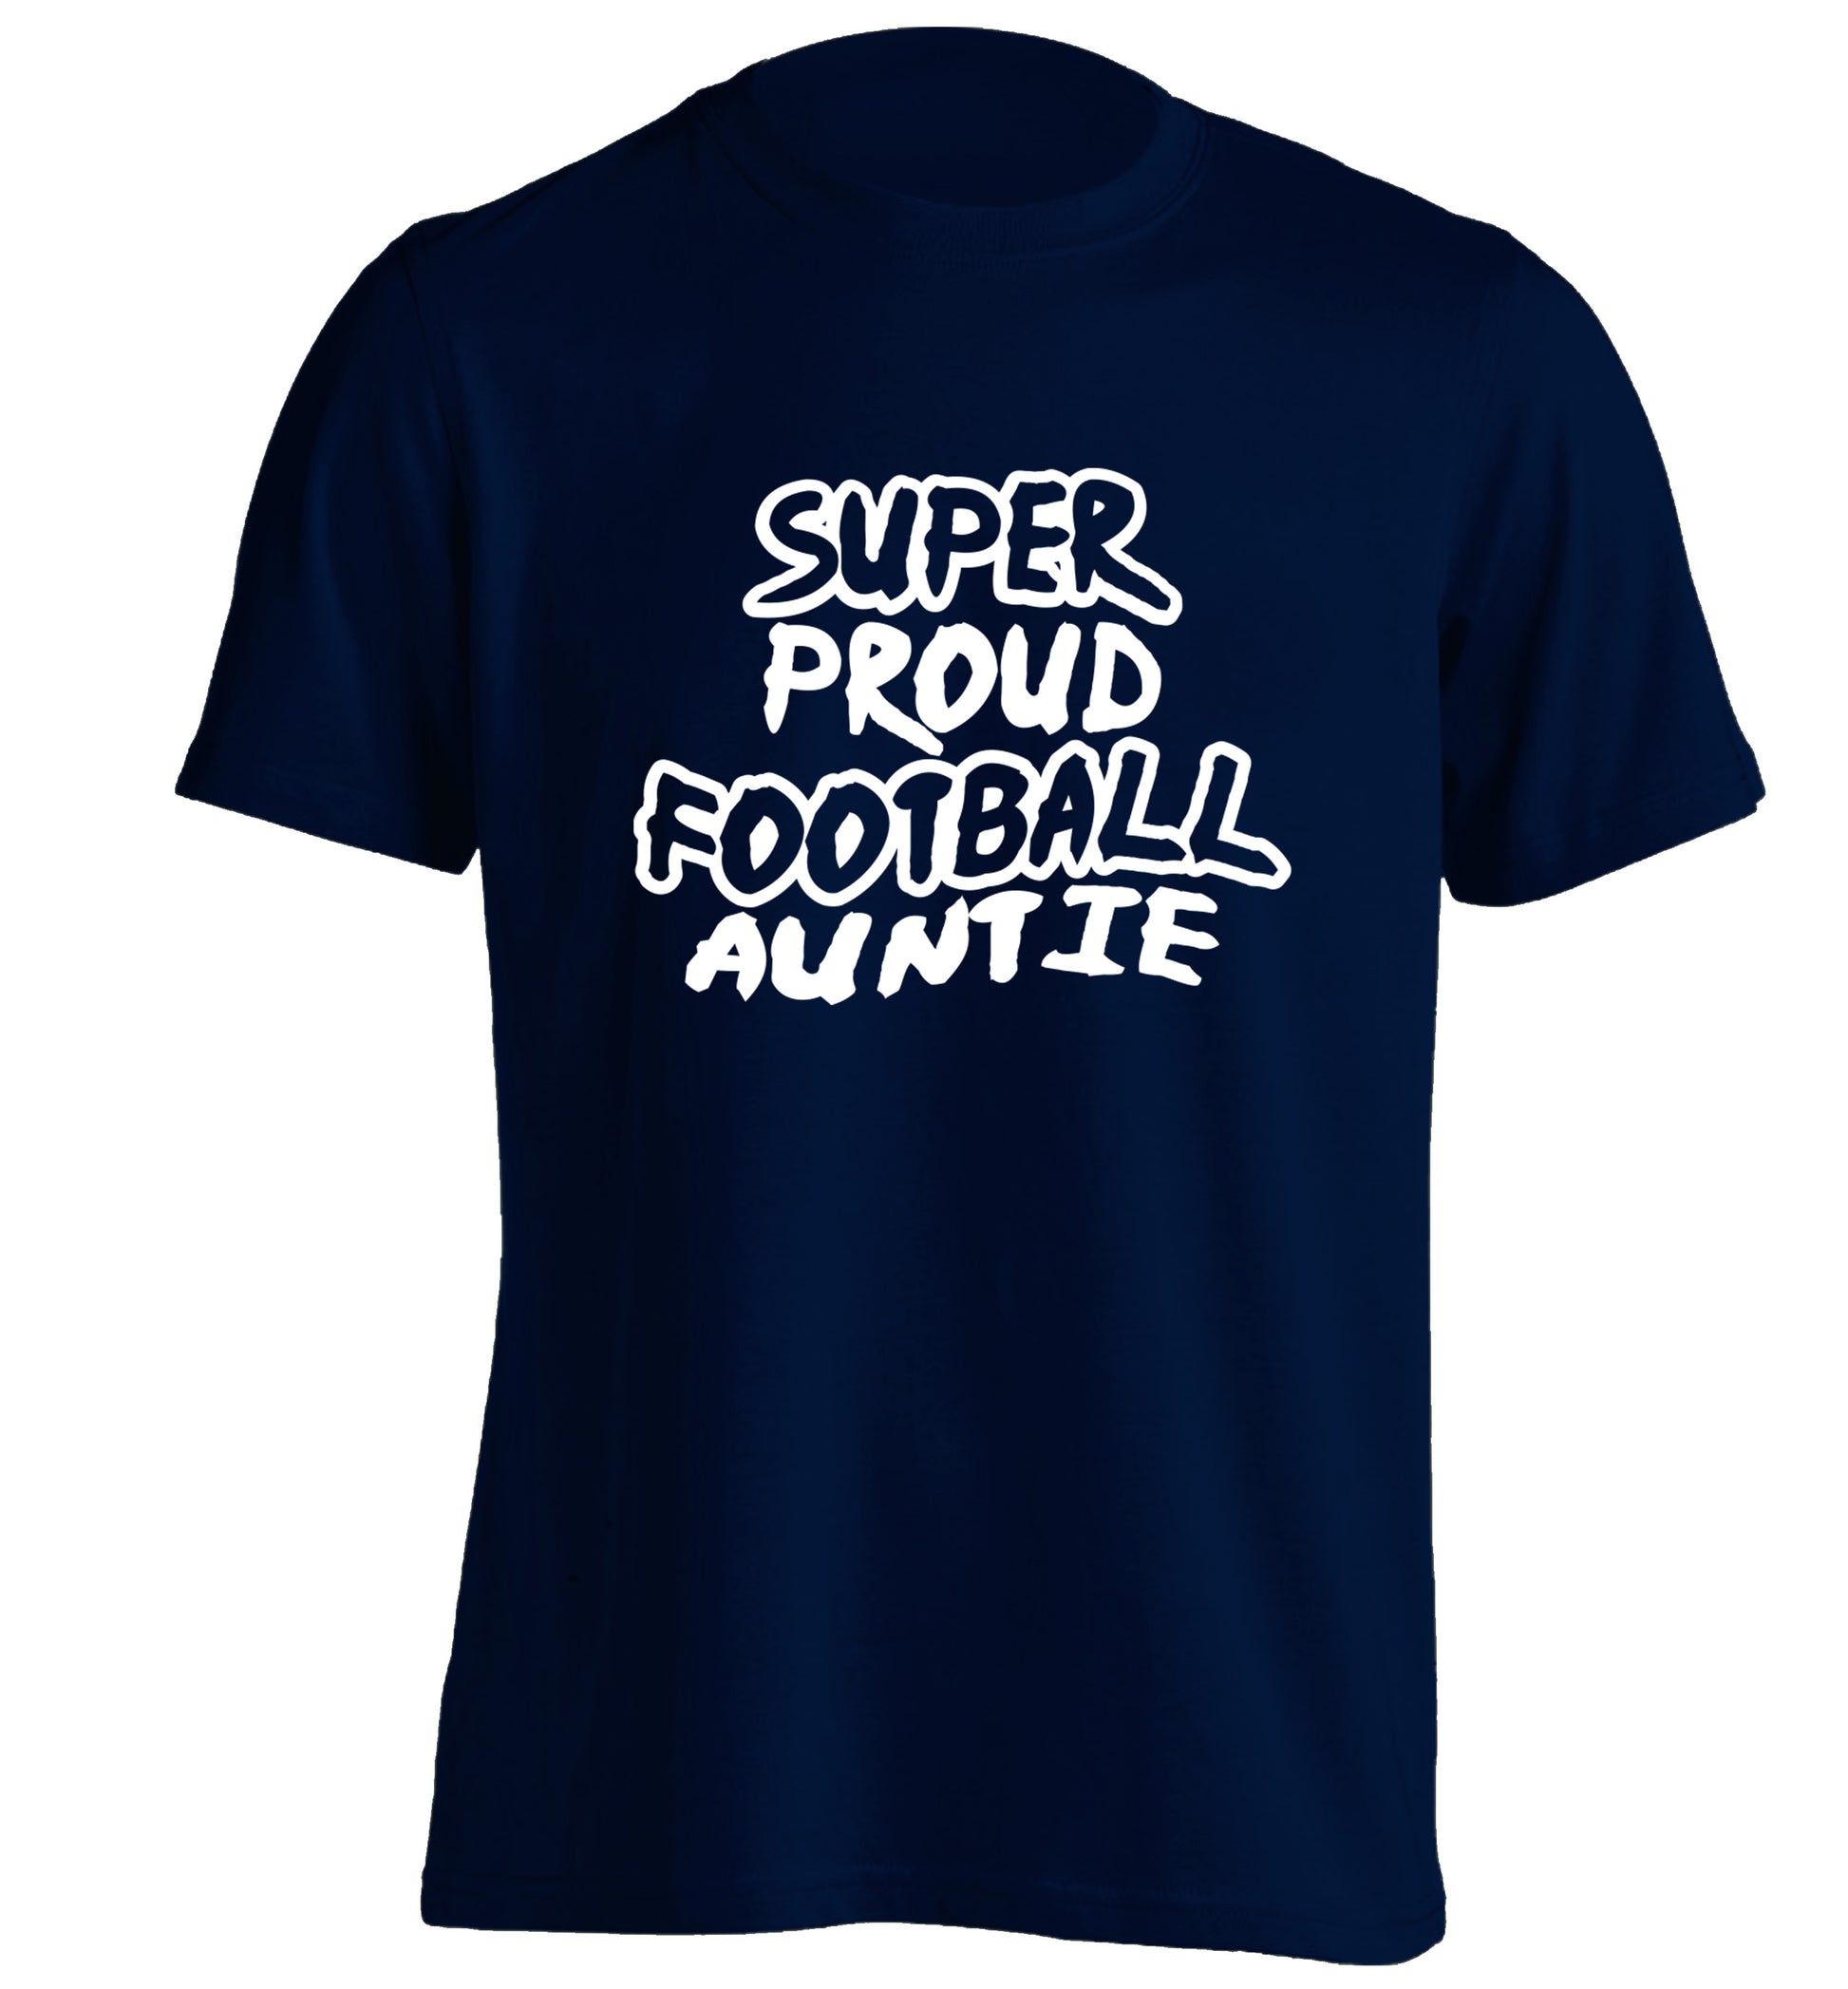 Super proud football auntie adults unisexnavy Tshirt 2XL